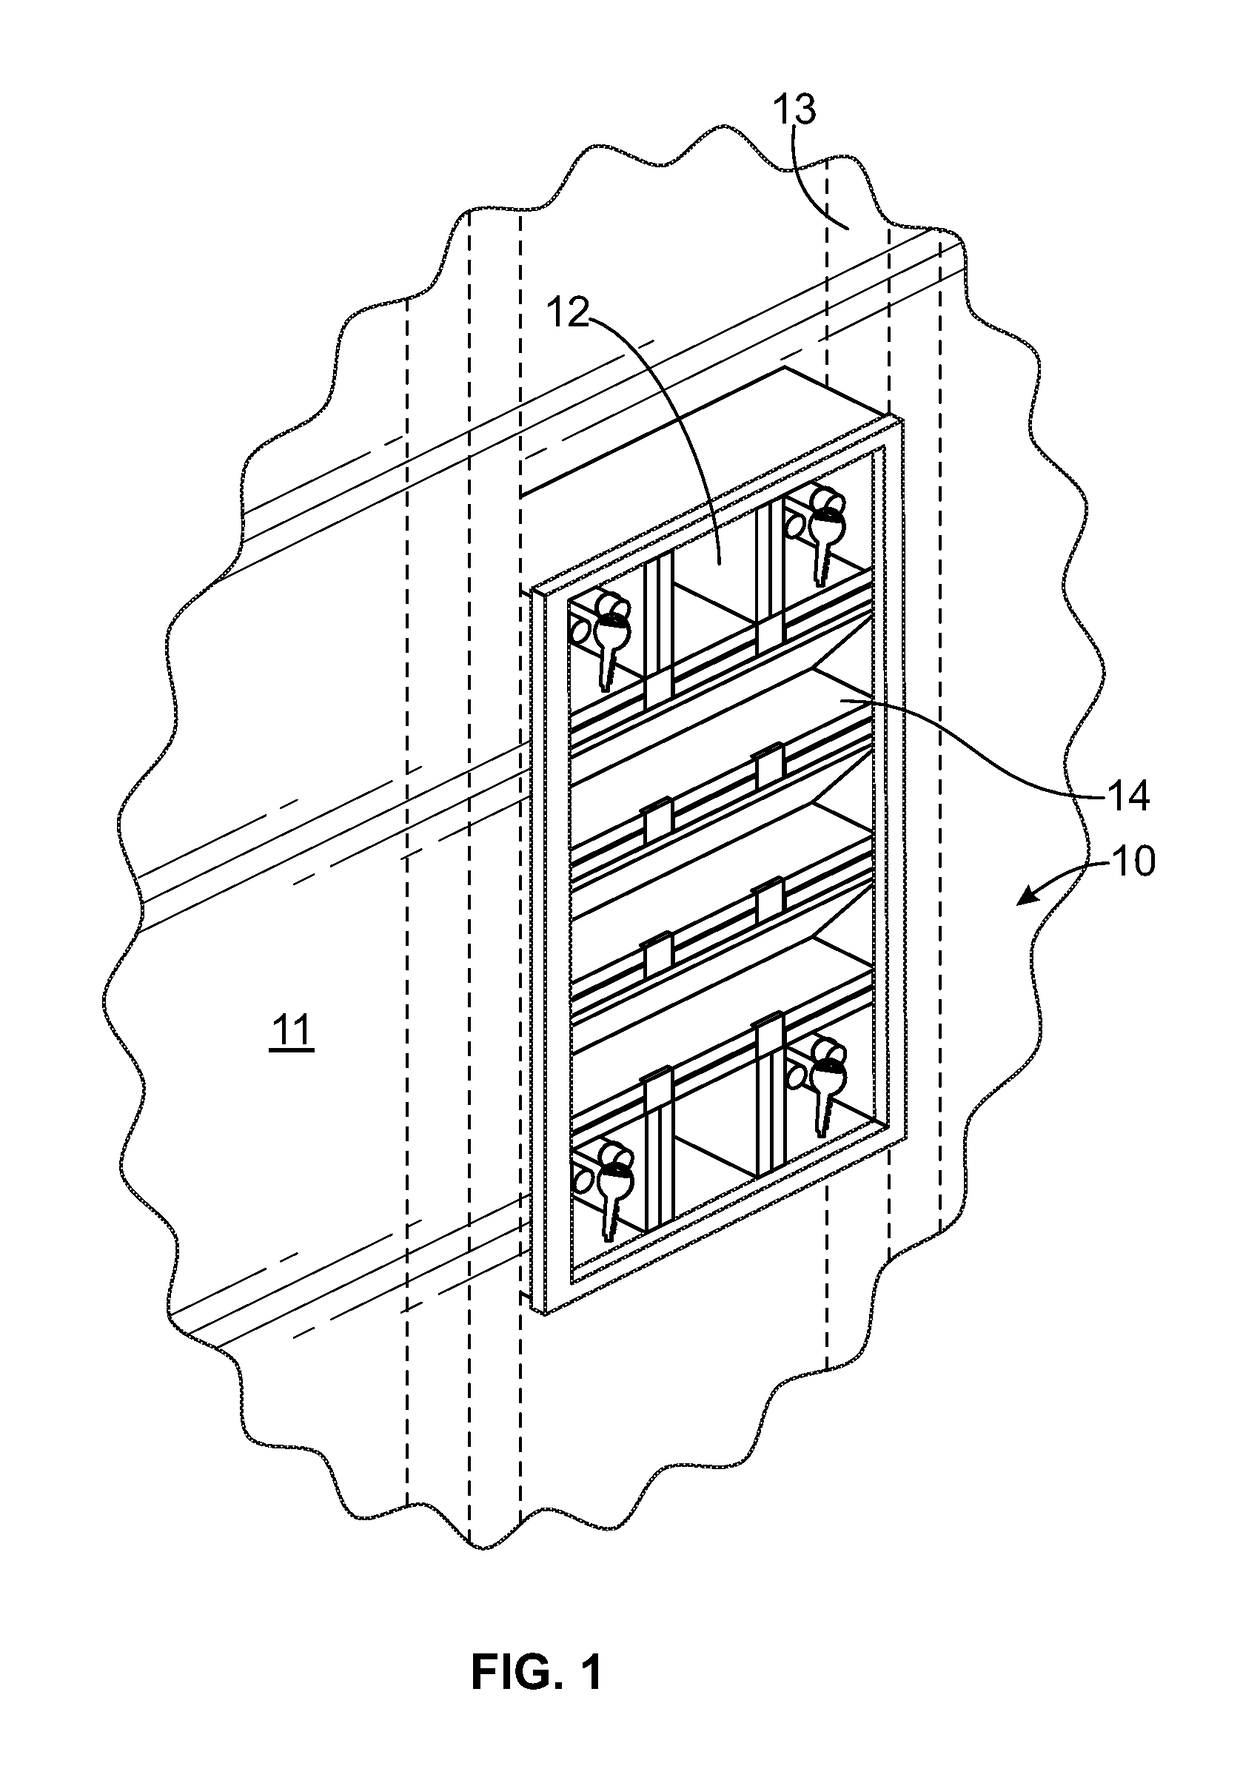 Modular organization system and means of interconnection and support